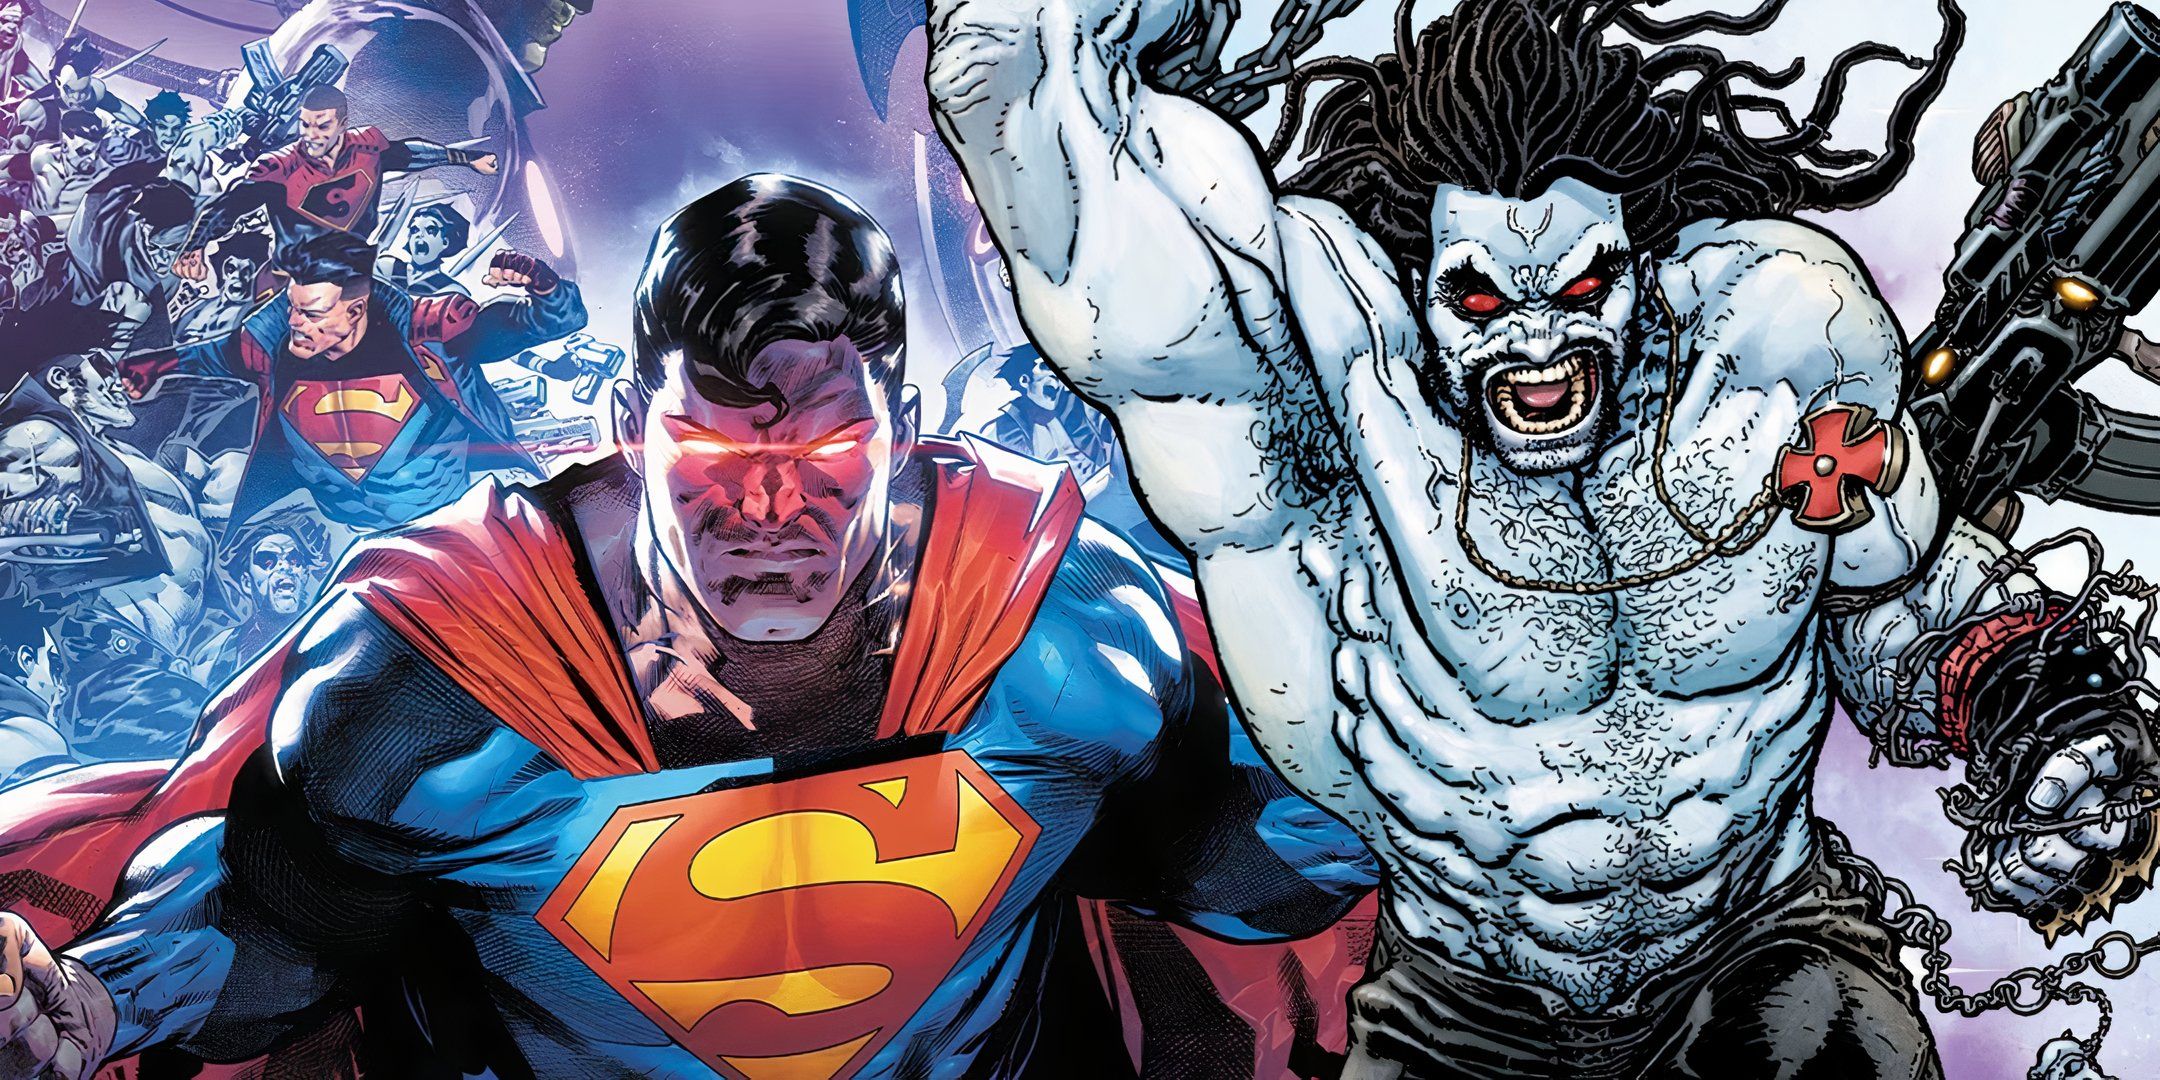 DC's New "House of Lobo" Finally Gives Its Kryptonian Heroes a Worthy Enemy